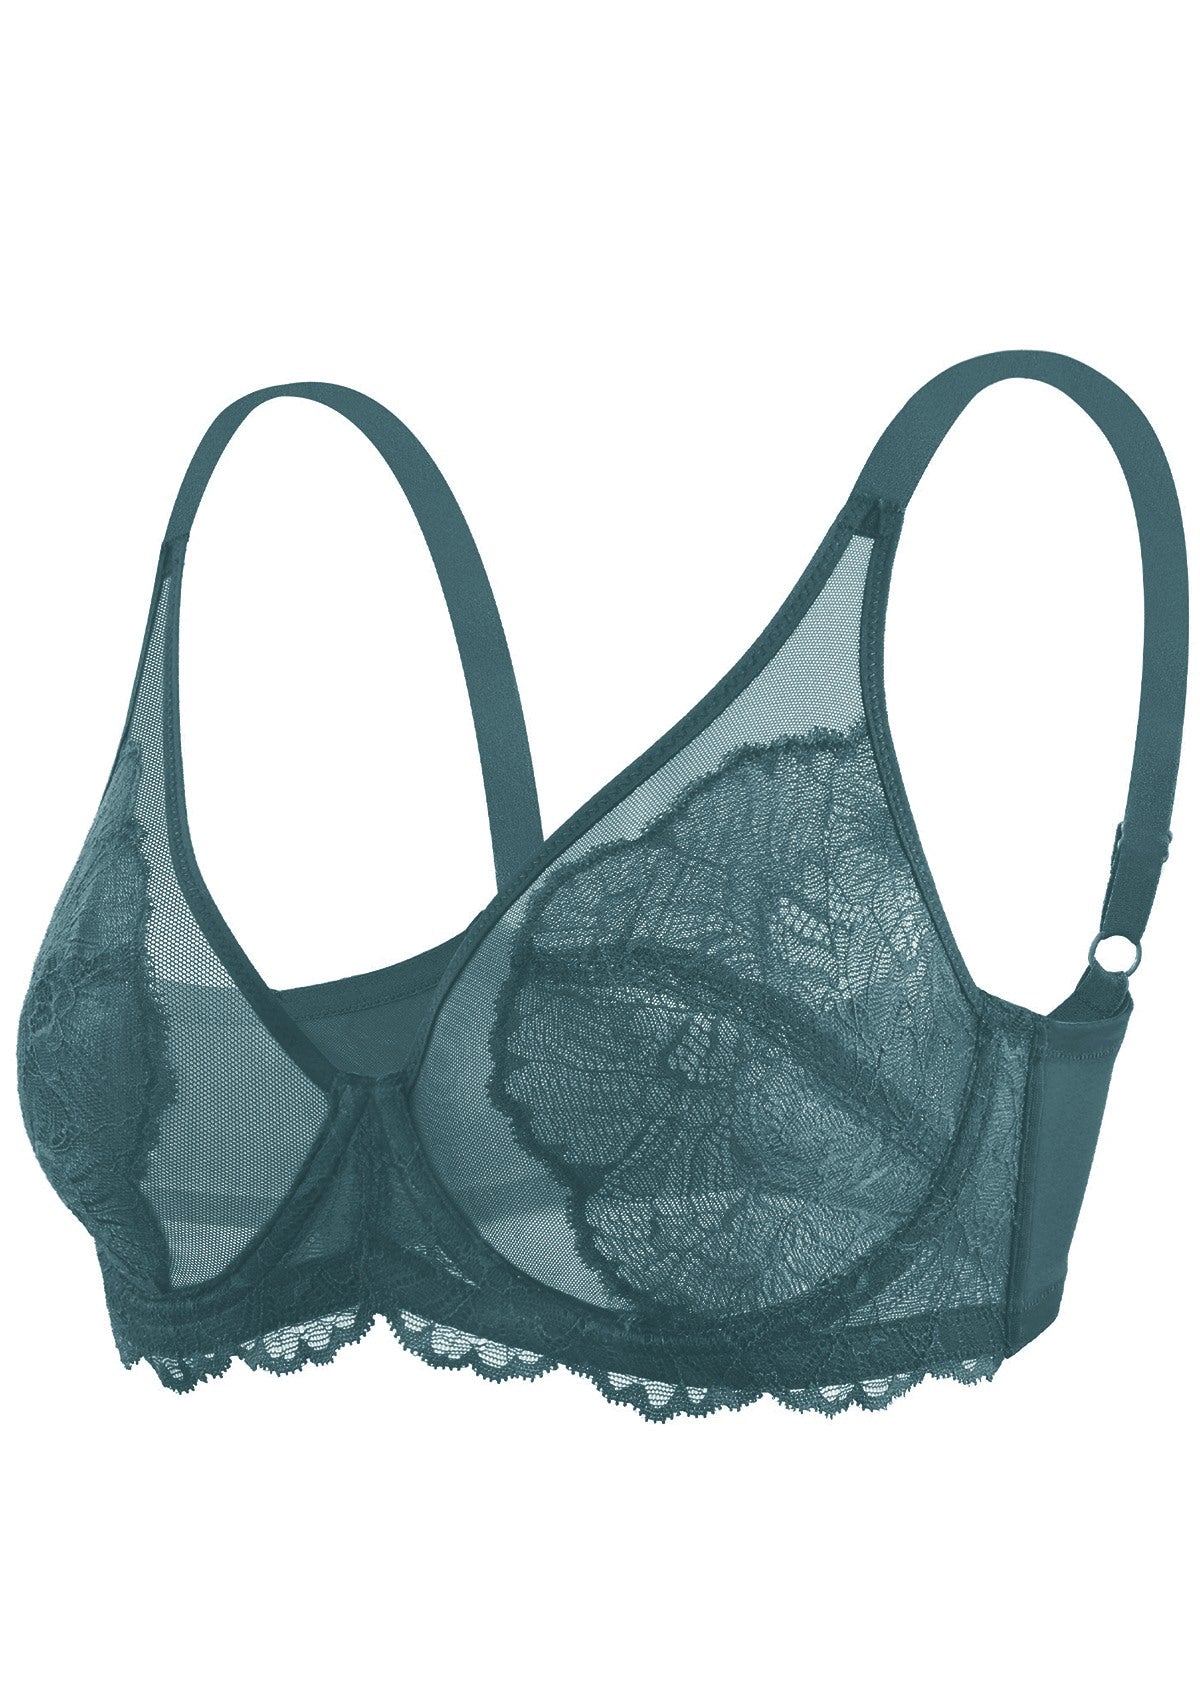 HSIA Blossom Full Figure See-Through Lace Bra For Side And Back Fat - Biscay Blue / 38 / DD/E